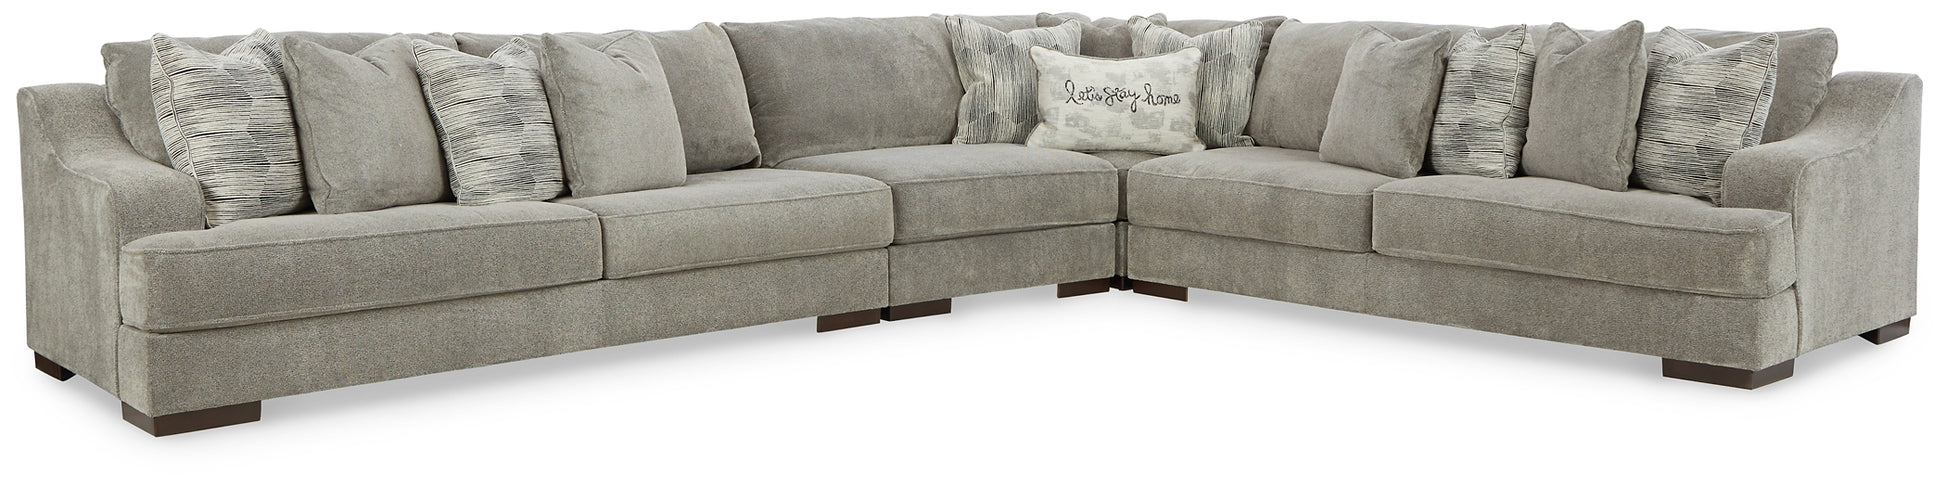 Bayless 4-Piece Sectional JB's Furniture Furniture, Bedroom, Accessories